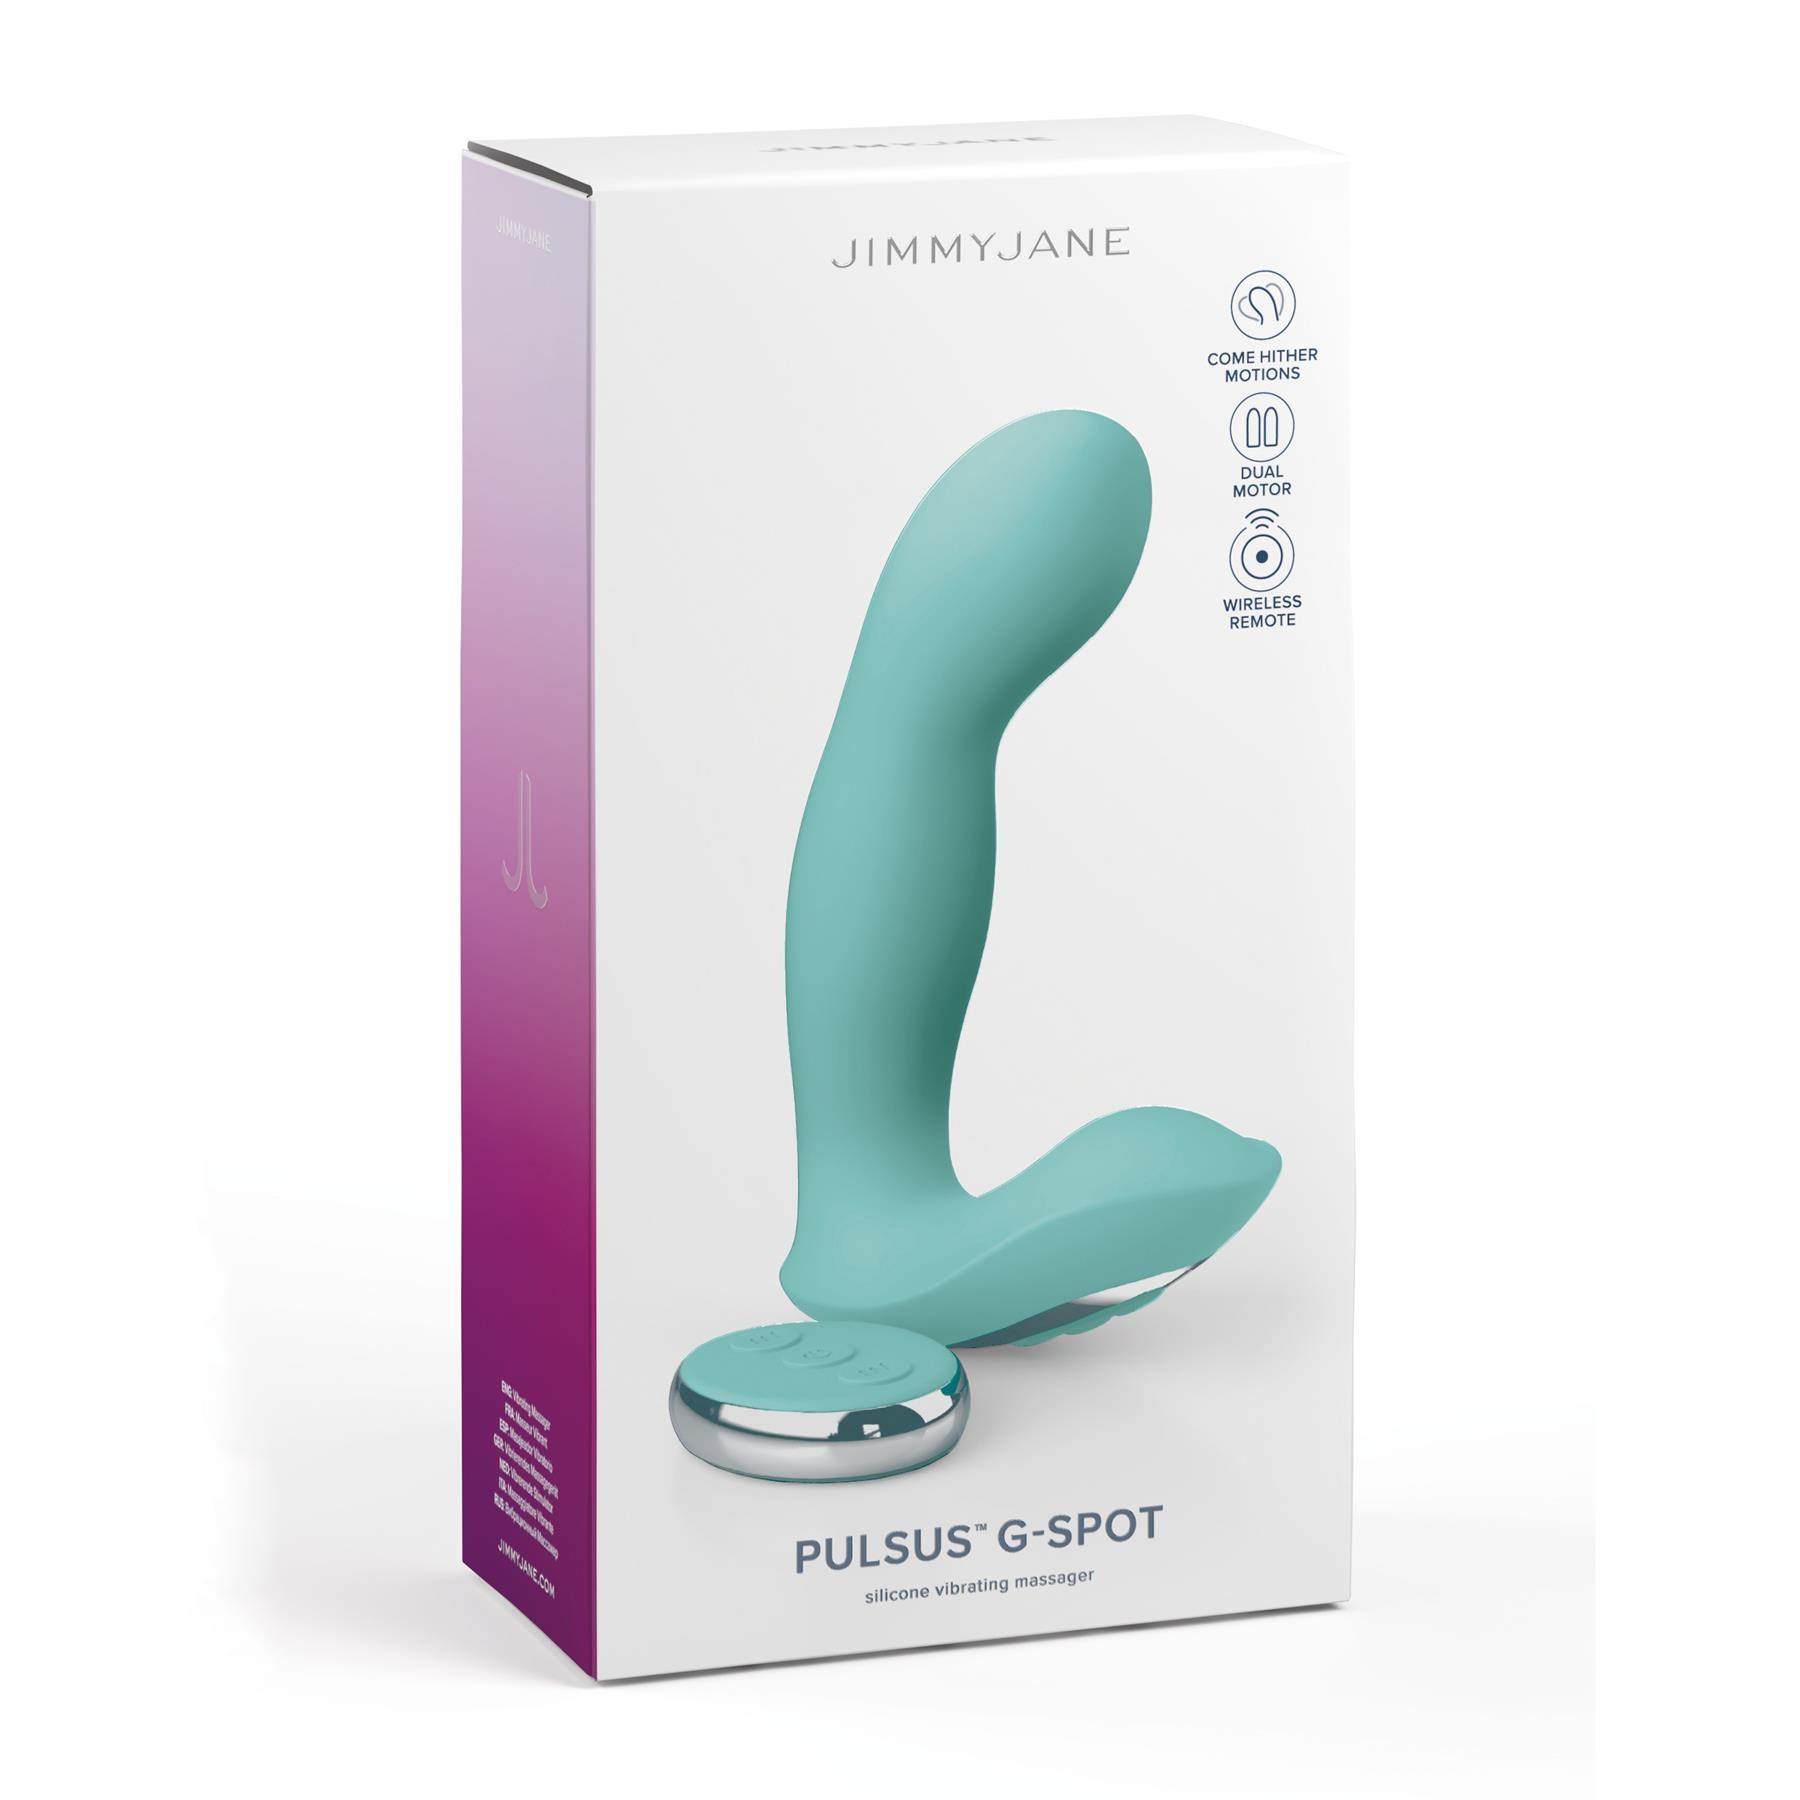 Jimmy Jane Pulsus G-Spot Vibrator With Remote Control - Packaging